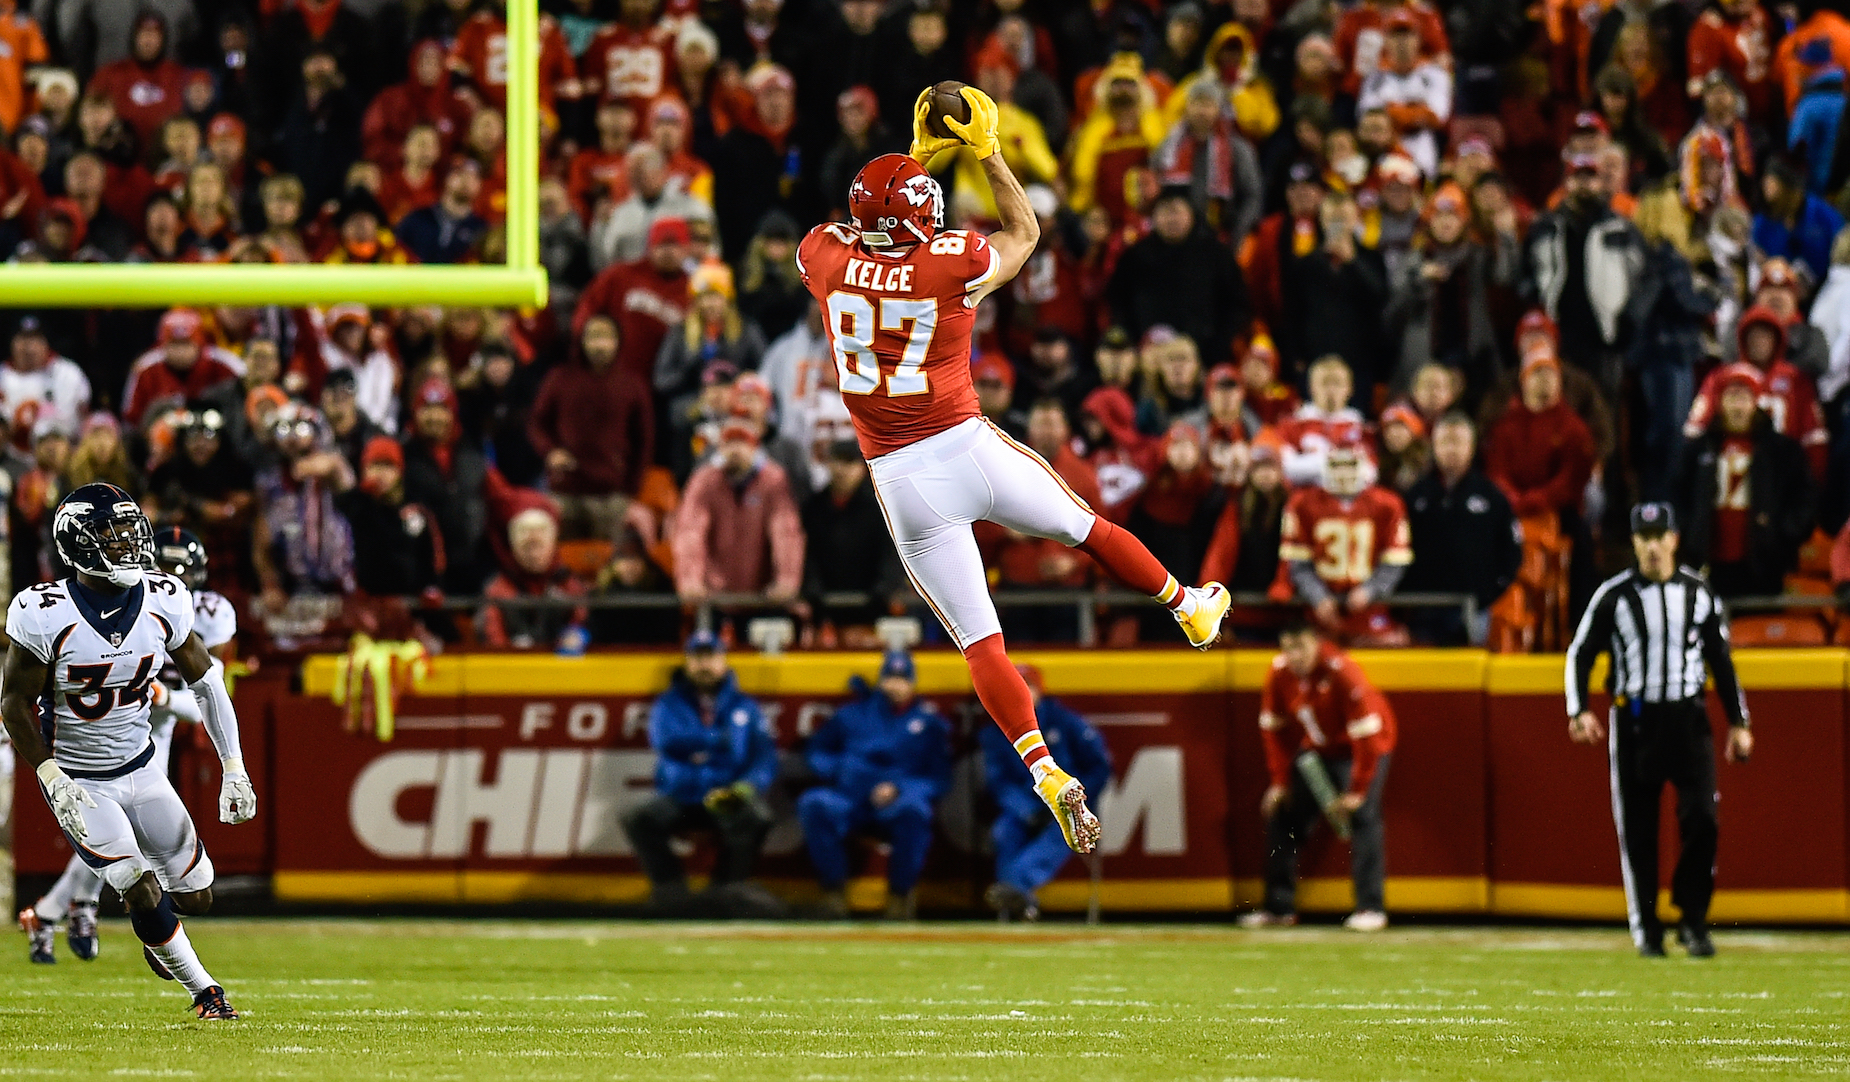 Chiefs tight end Travis Kelce could have ruined his football career with marijuana before his brother stepped in.